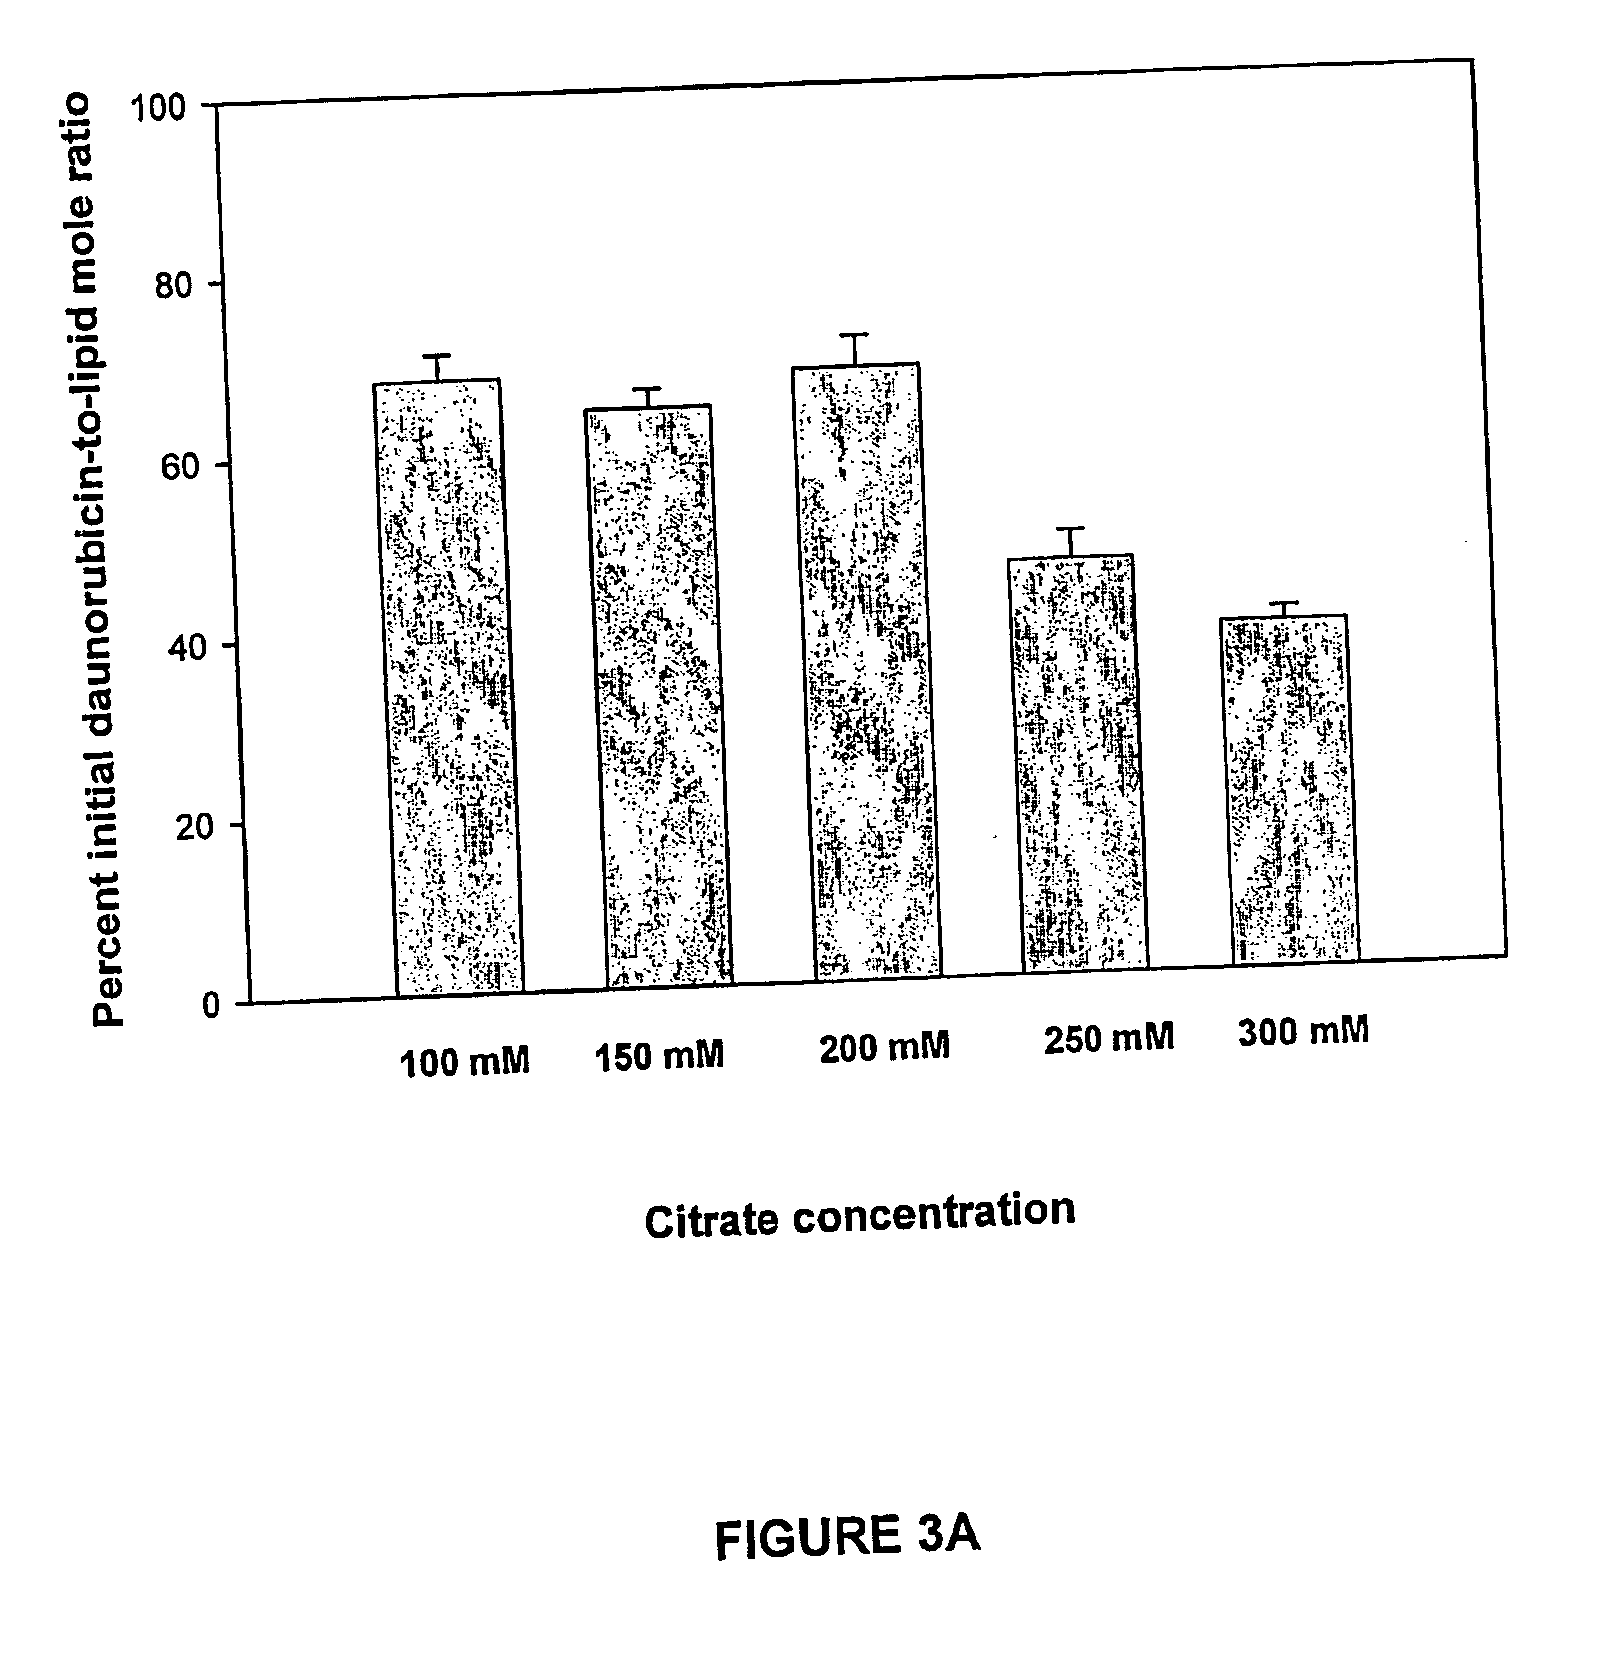 Lipid carrier compositions and methods for improved drug retention